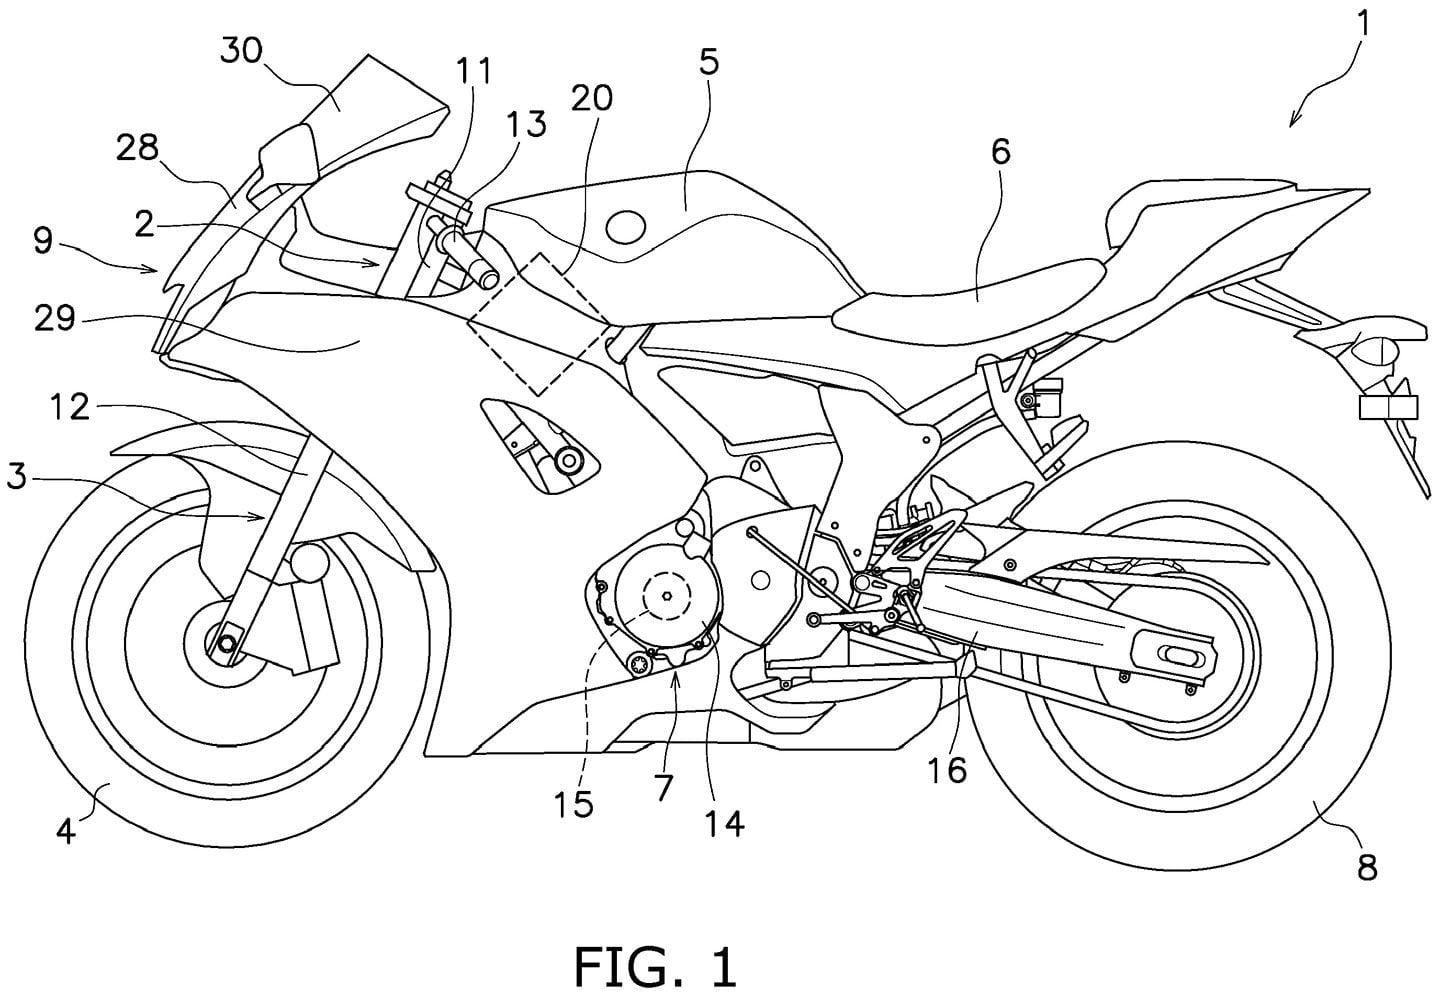 A second patent shows a Yamaha YZF-R7 as an application.